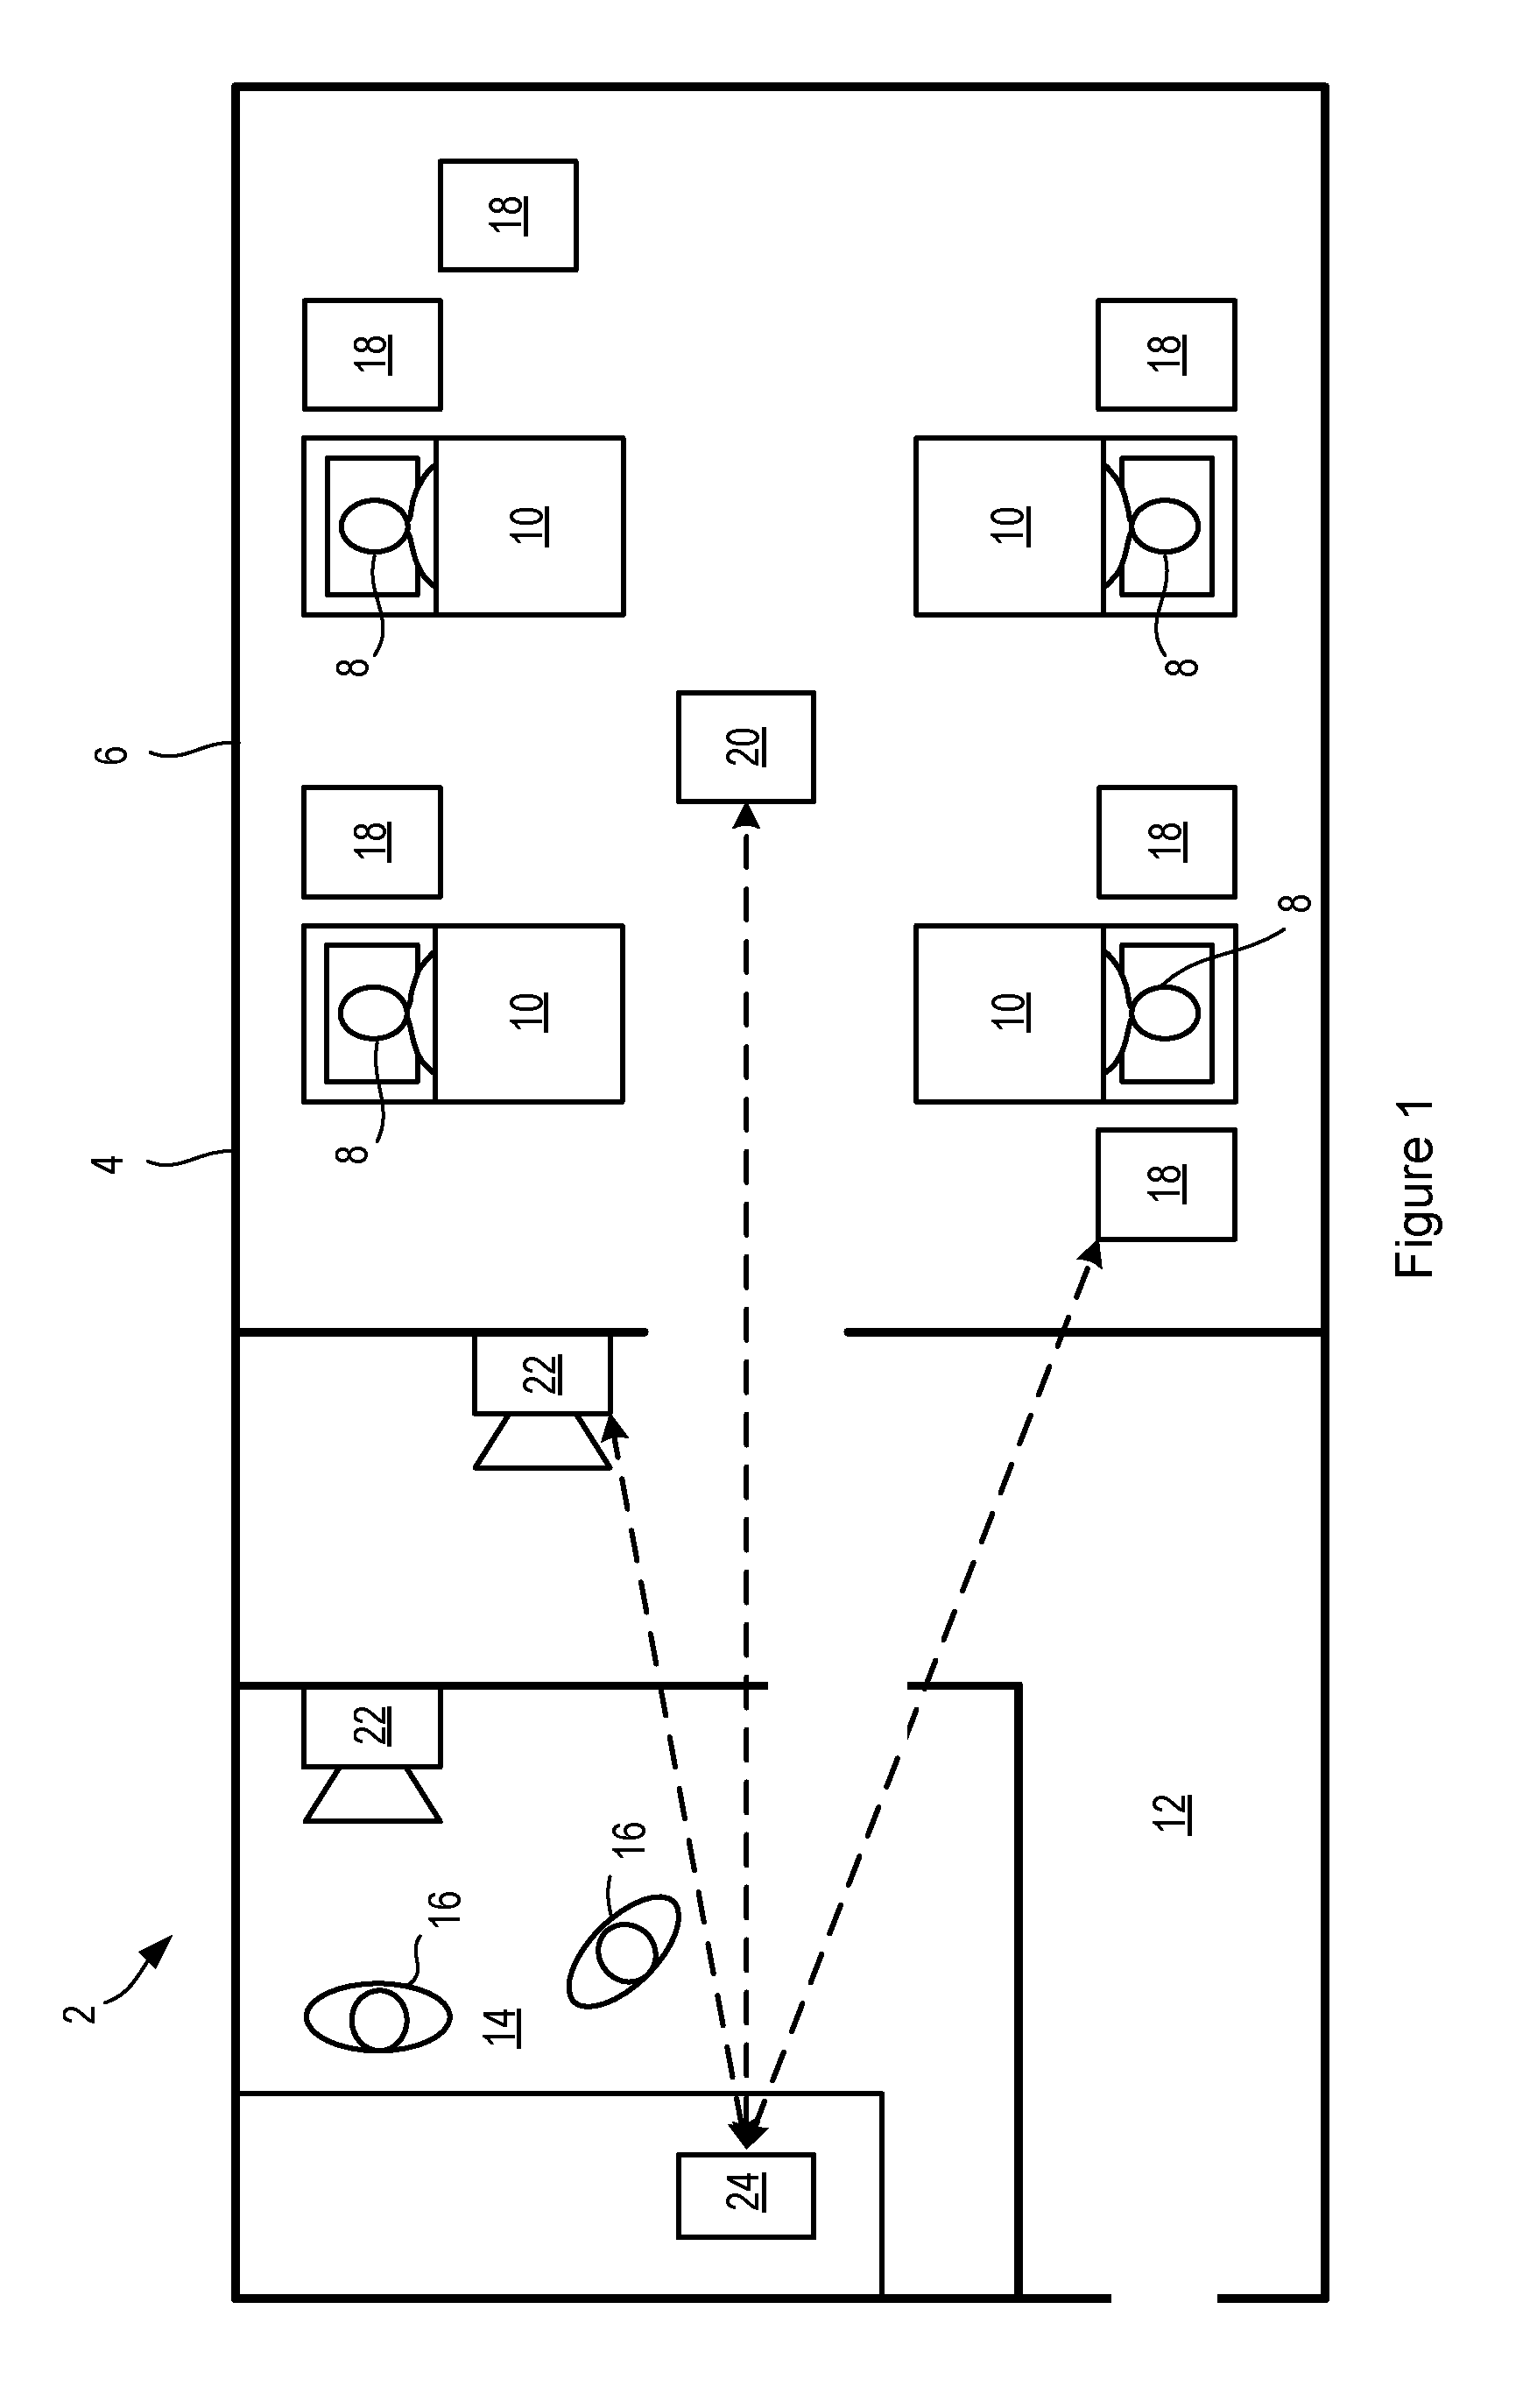 Systems and methods for reducing the impact of alarm sounds on patients